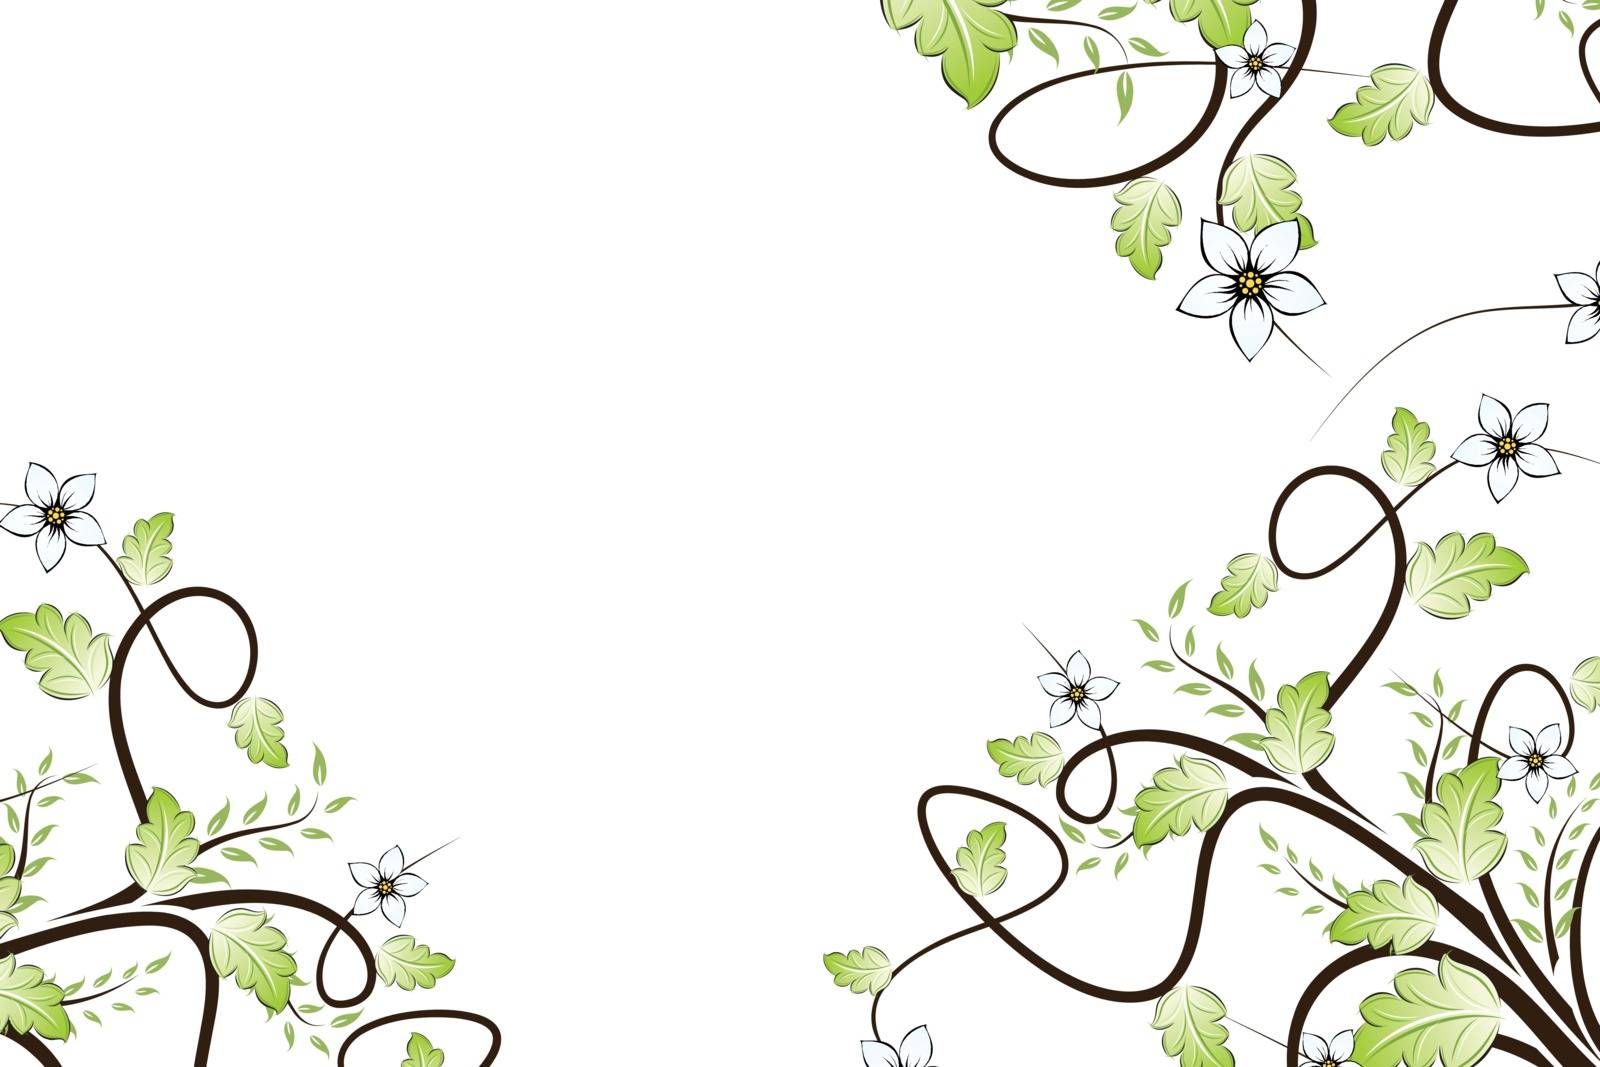 Abstract vector floral background with leaves isolated on white